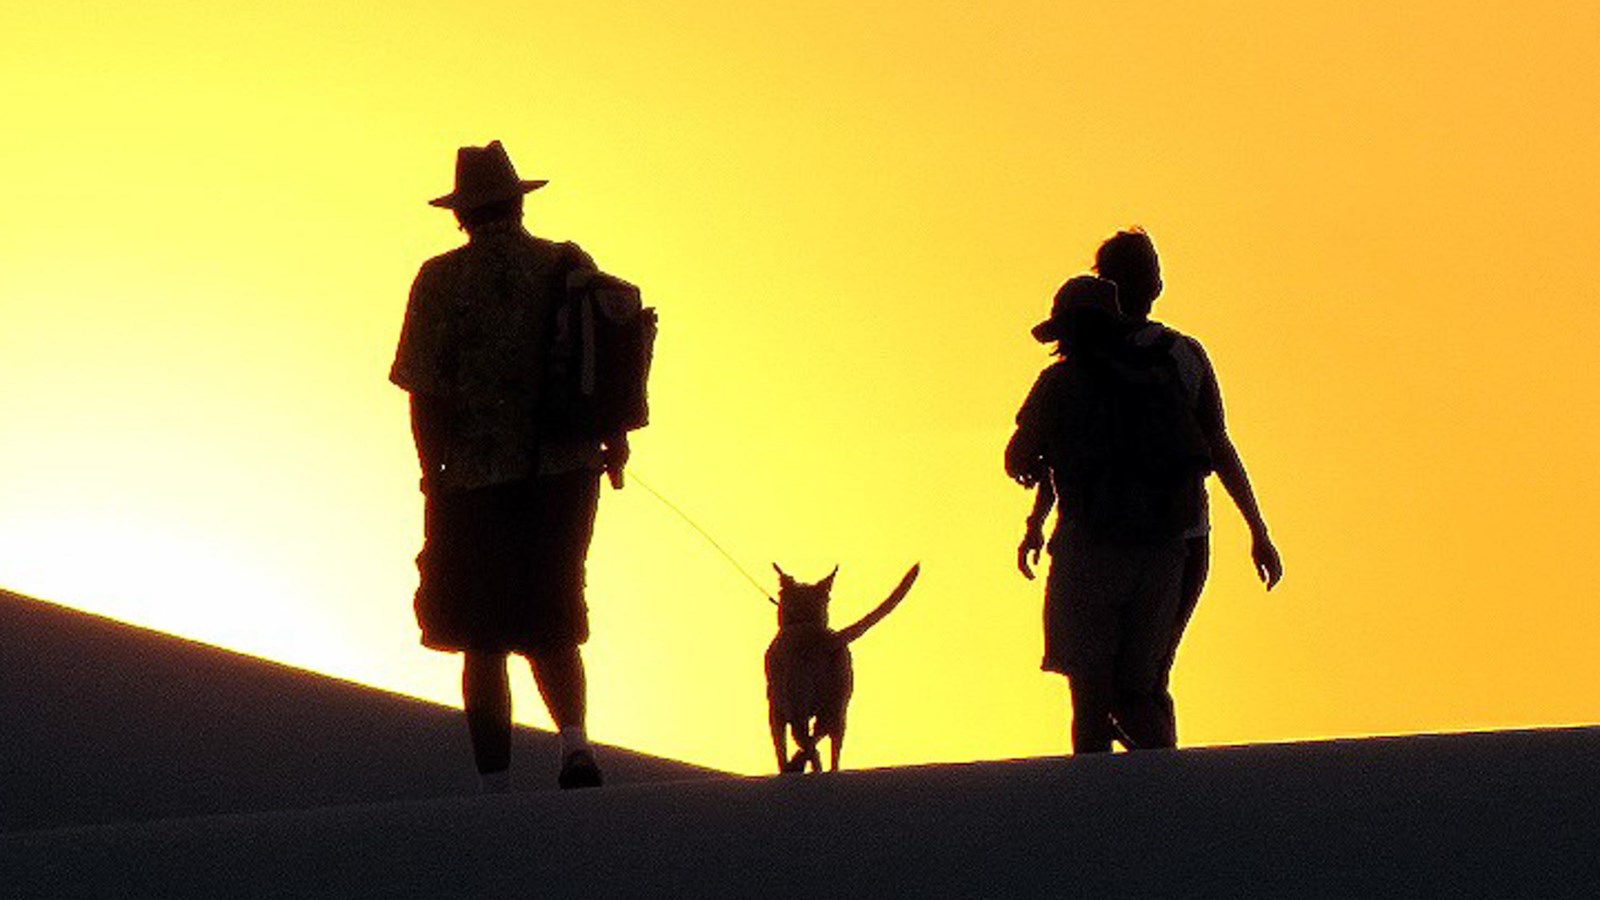 Two people walking a dog silhouetted by the sunset on a sand dune.